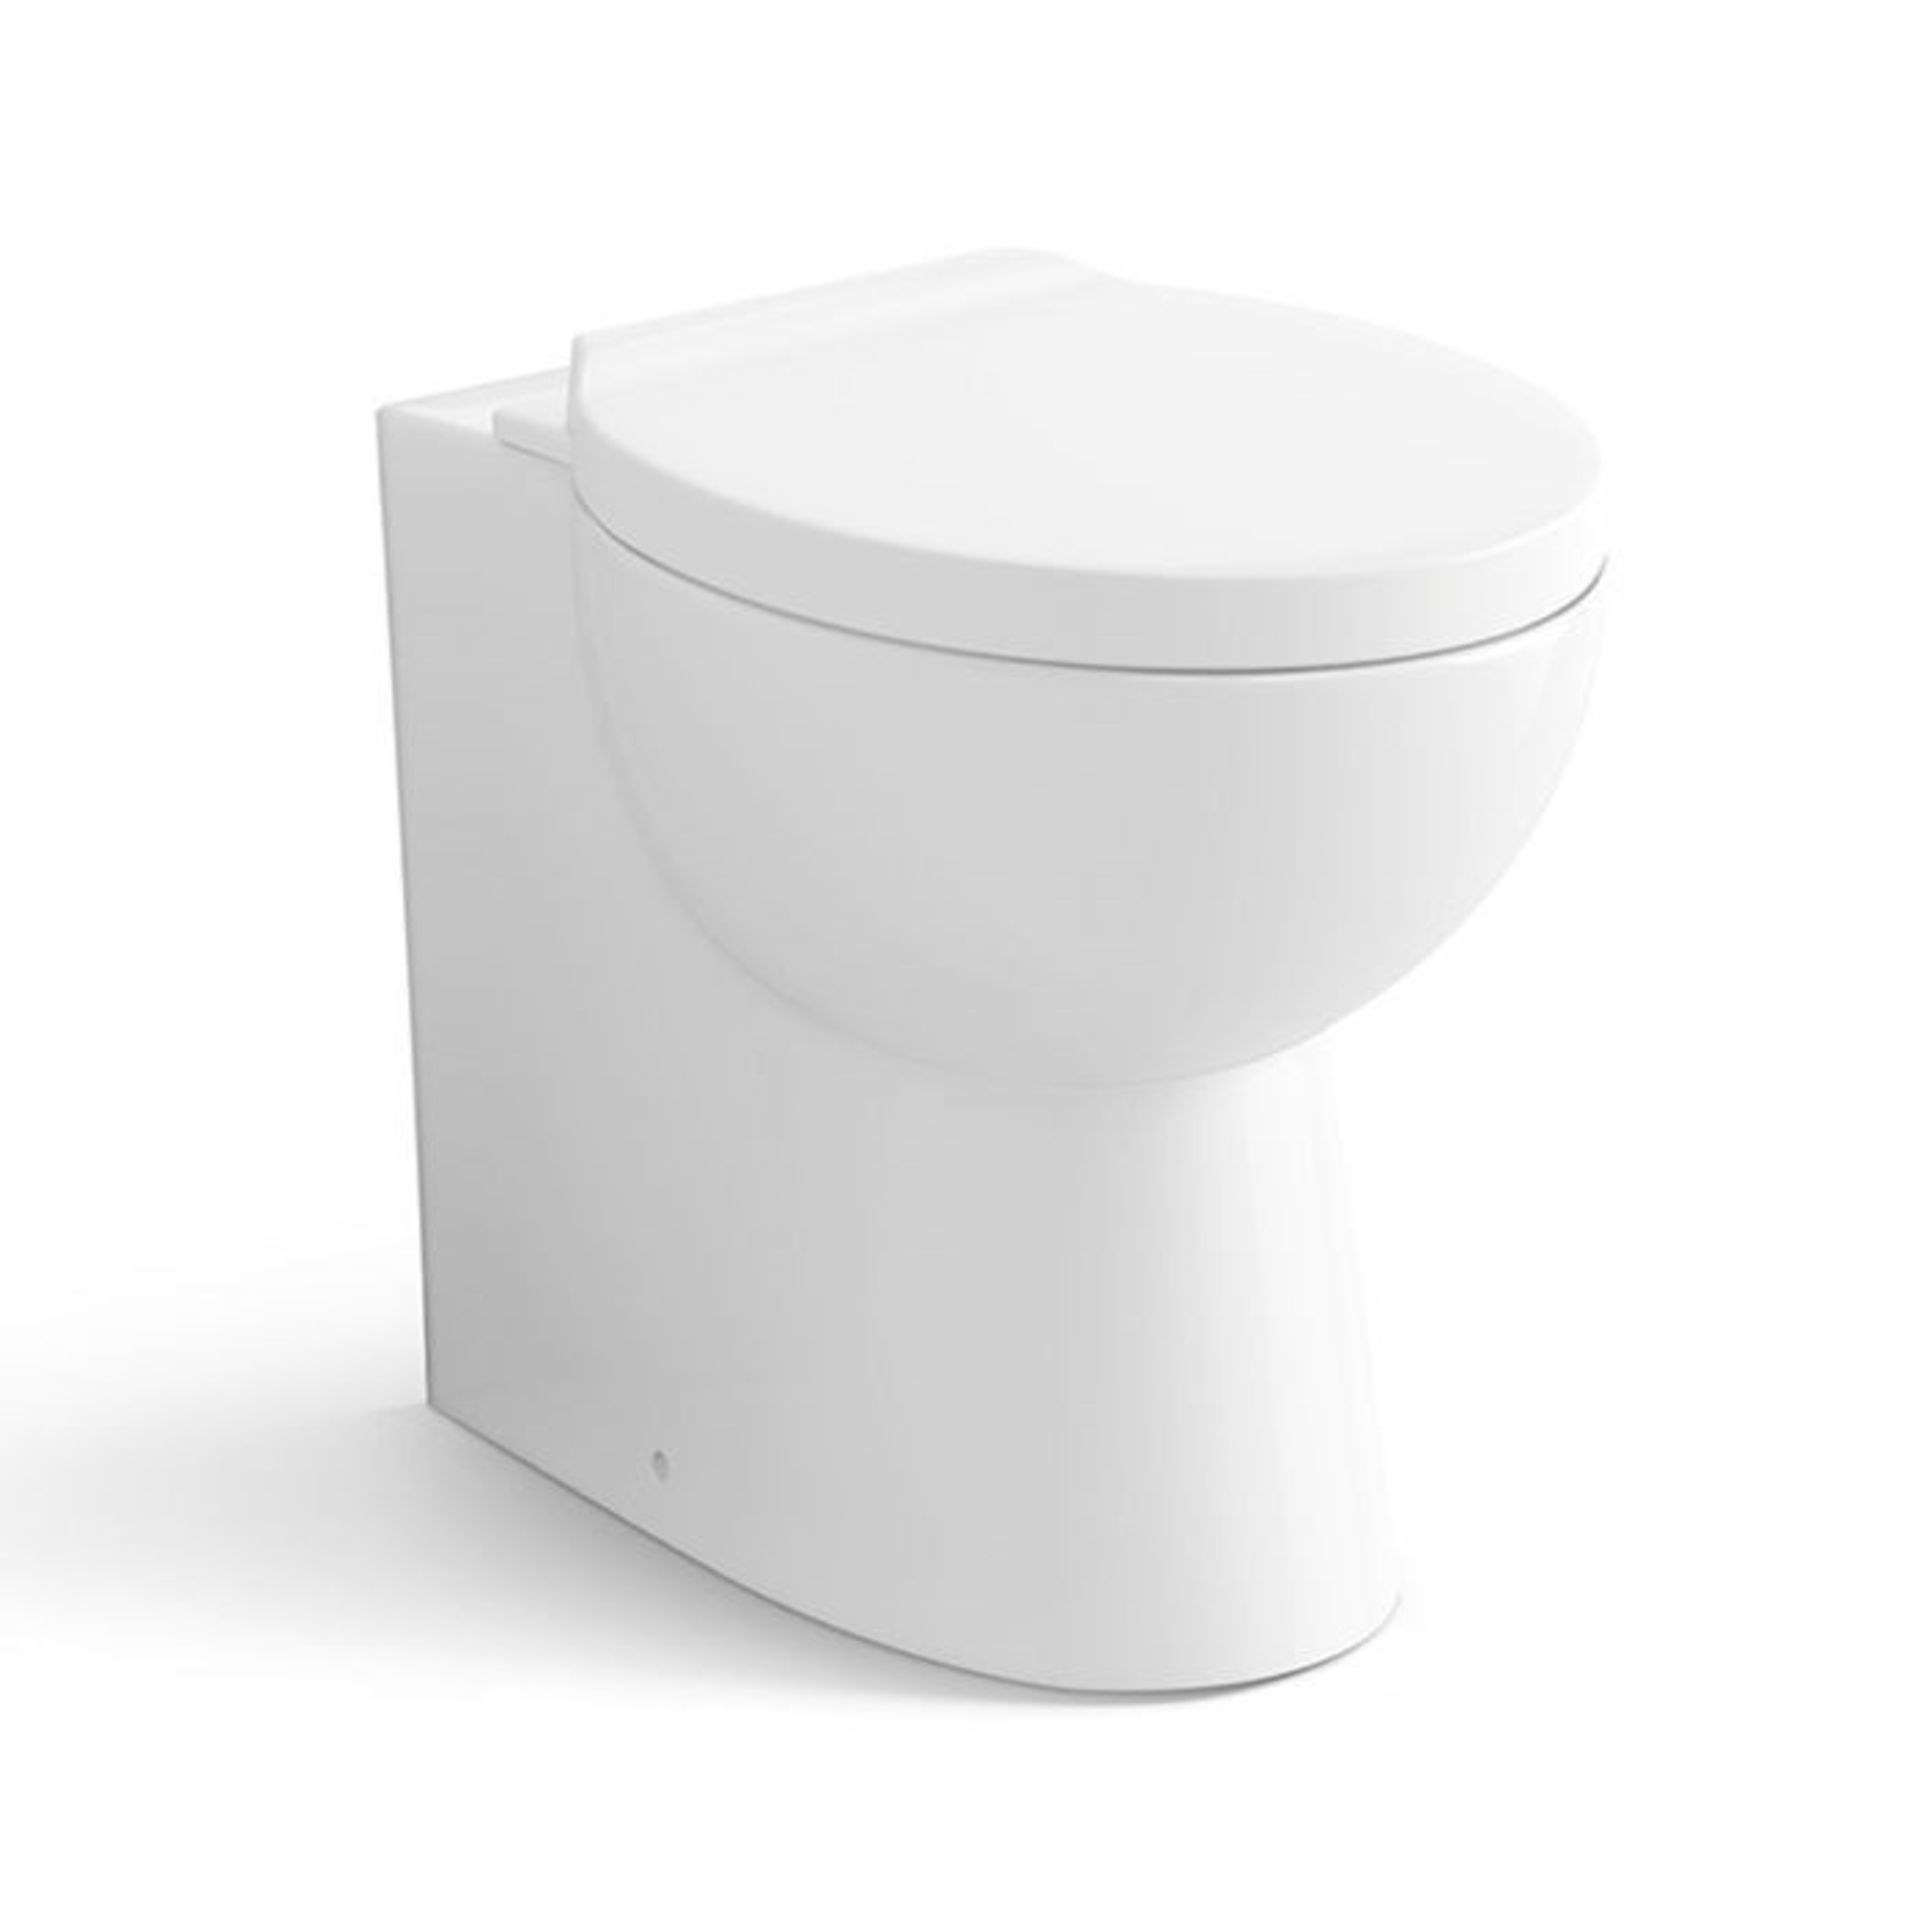 NEW Quartz Back to Wall Toilet. Stylish design Made from White Vitreous China Finished in a hig...